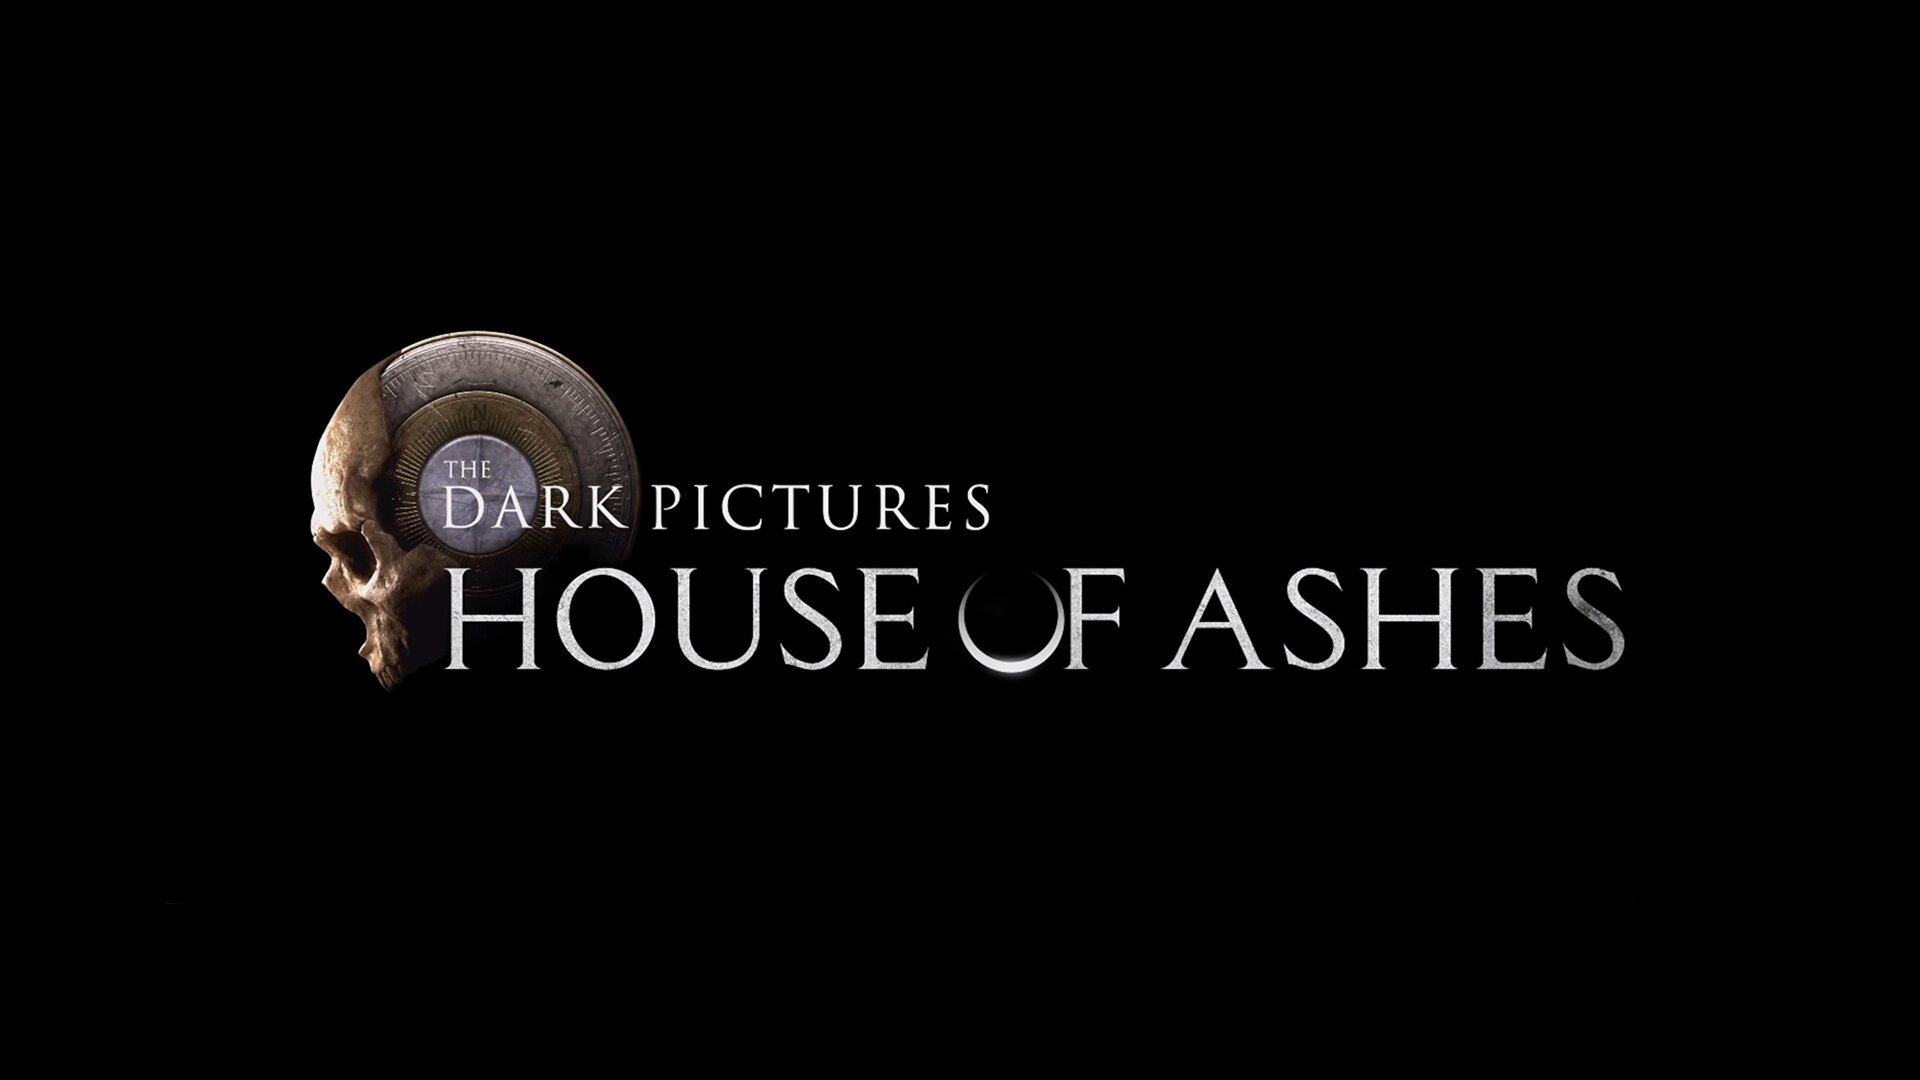 the dark pictures house of ashes feature